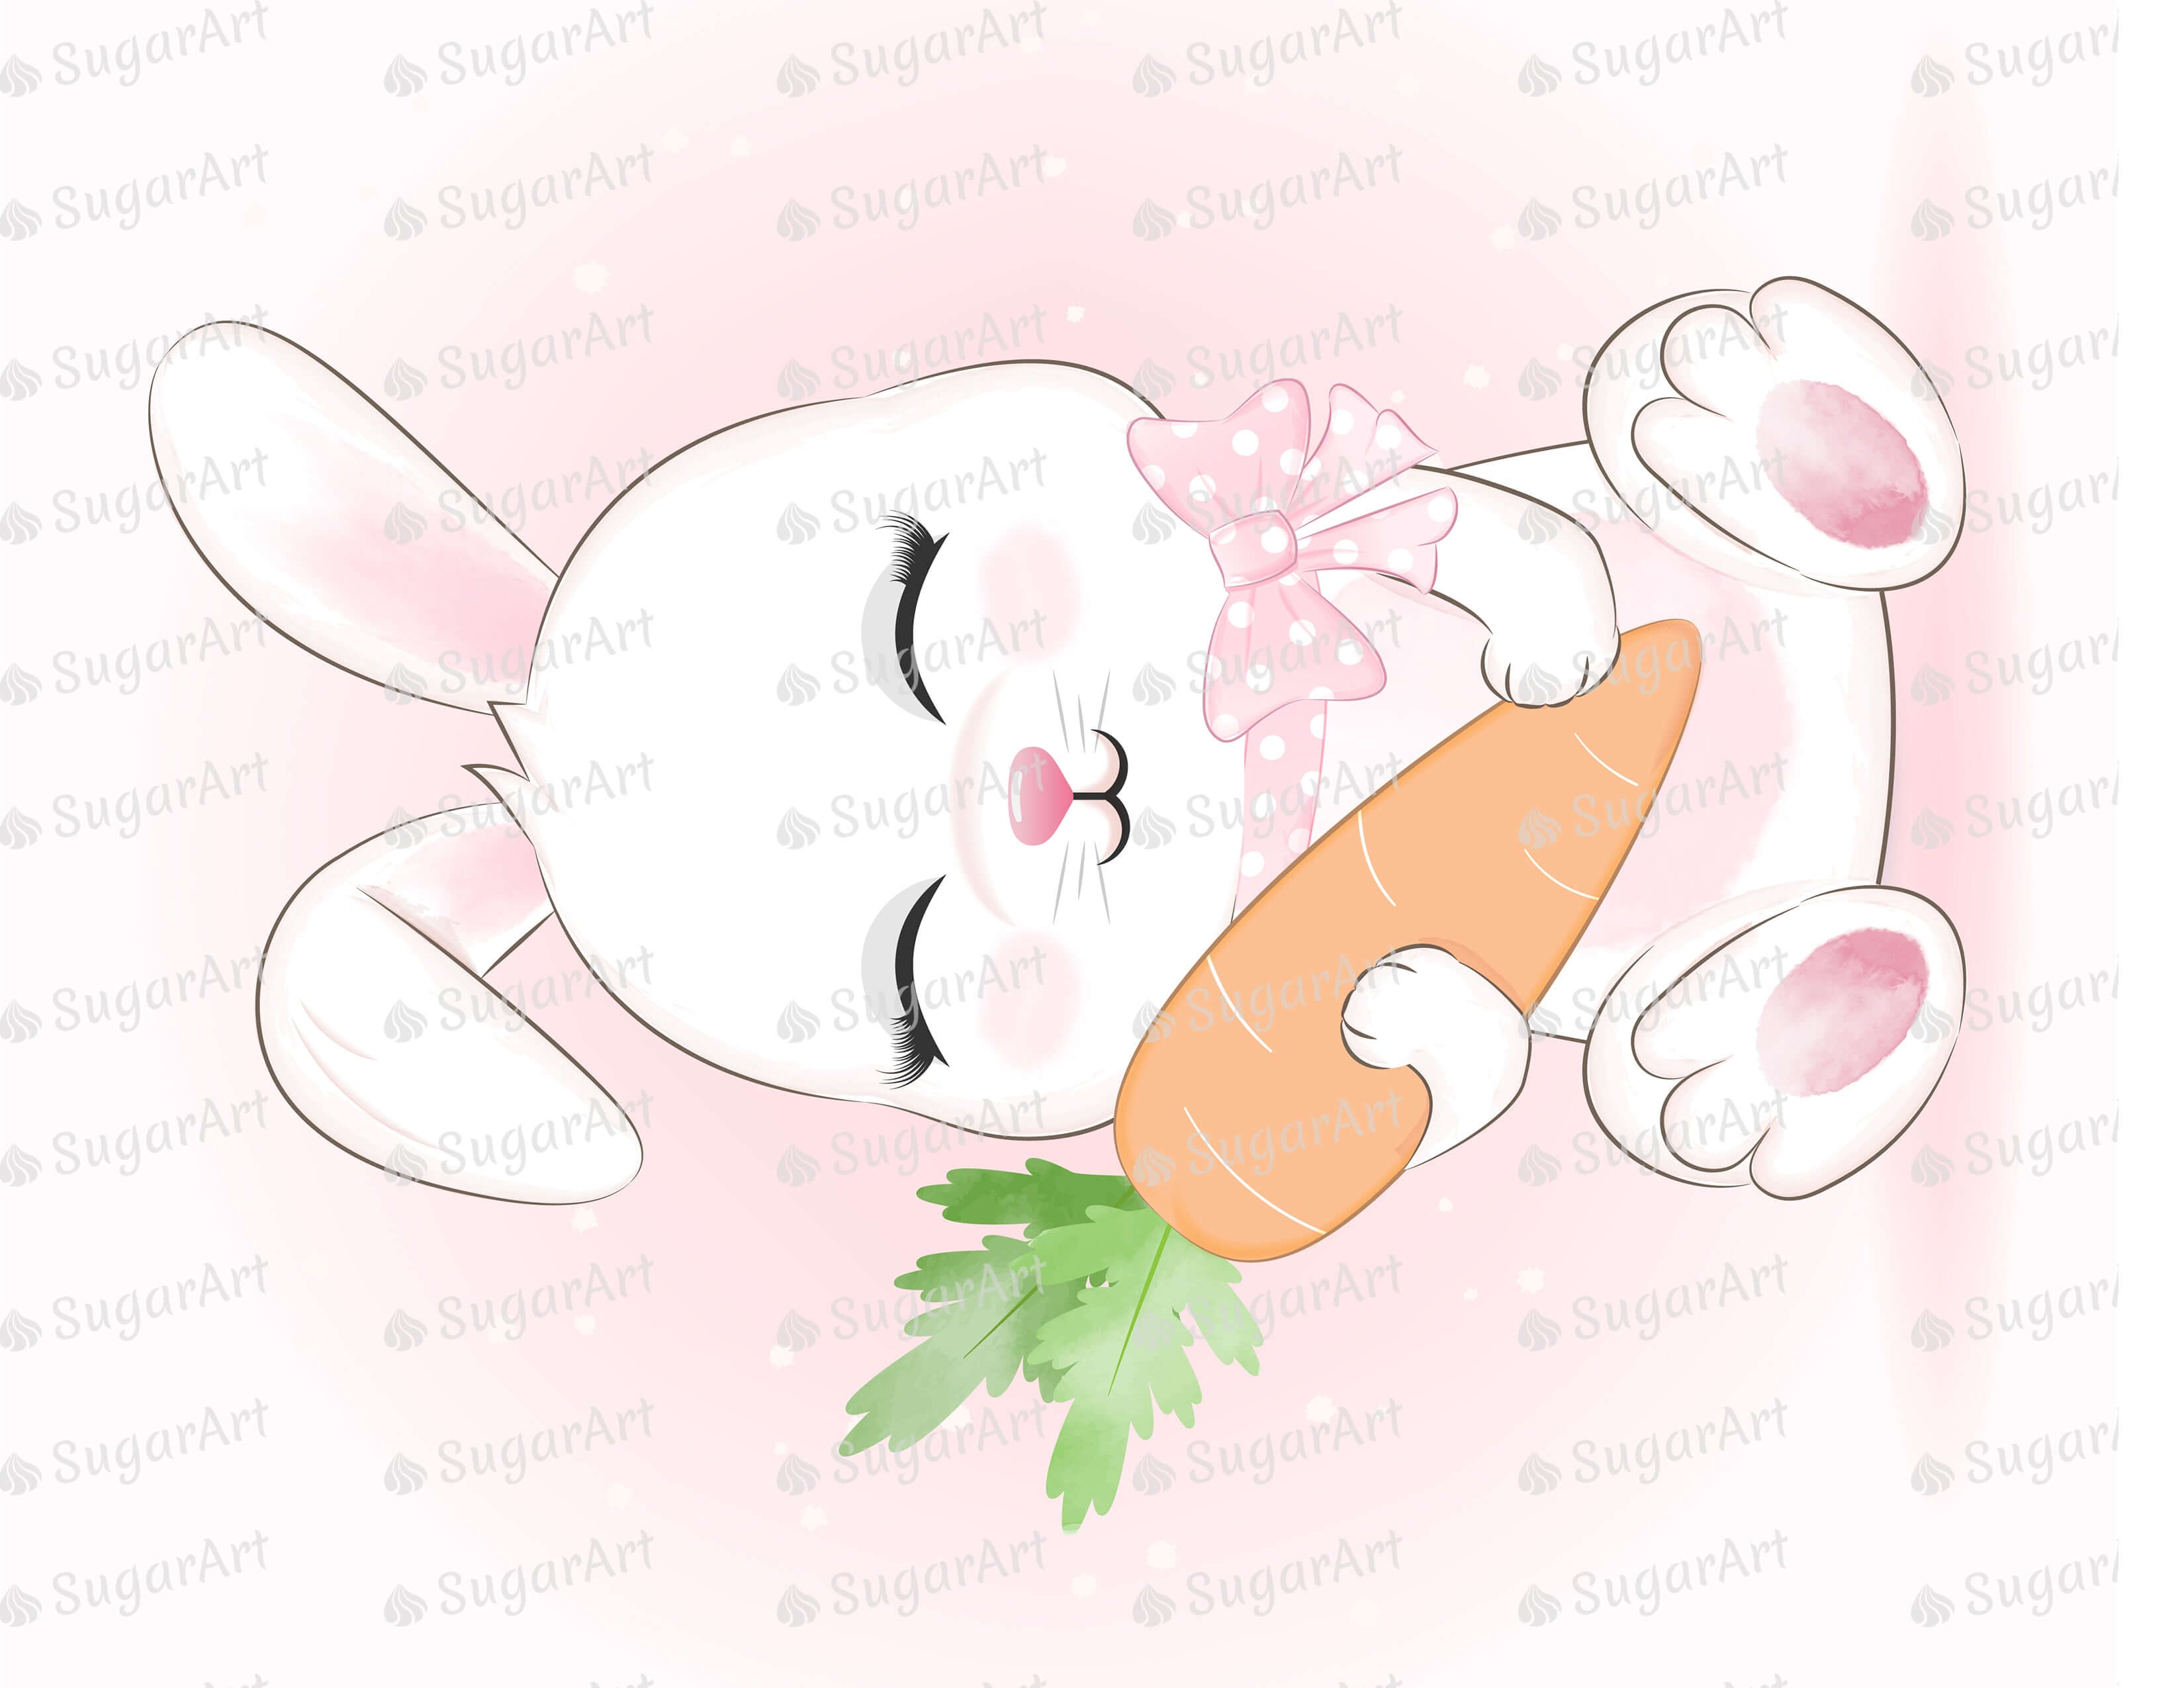 Cute Bunny with Carrot - Icing - ISA248.